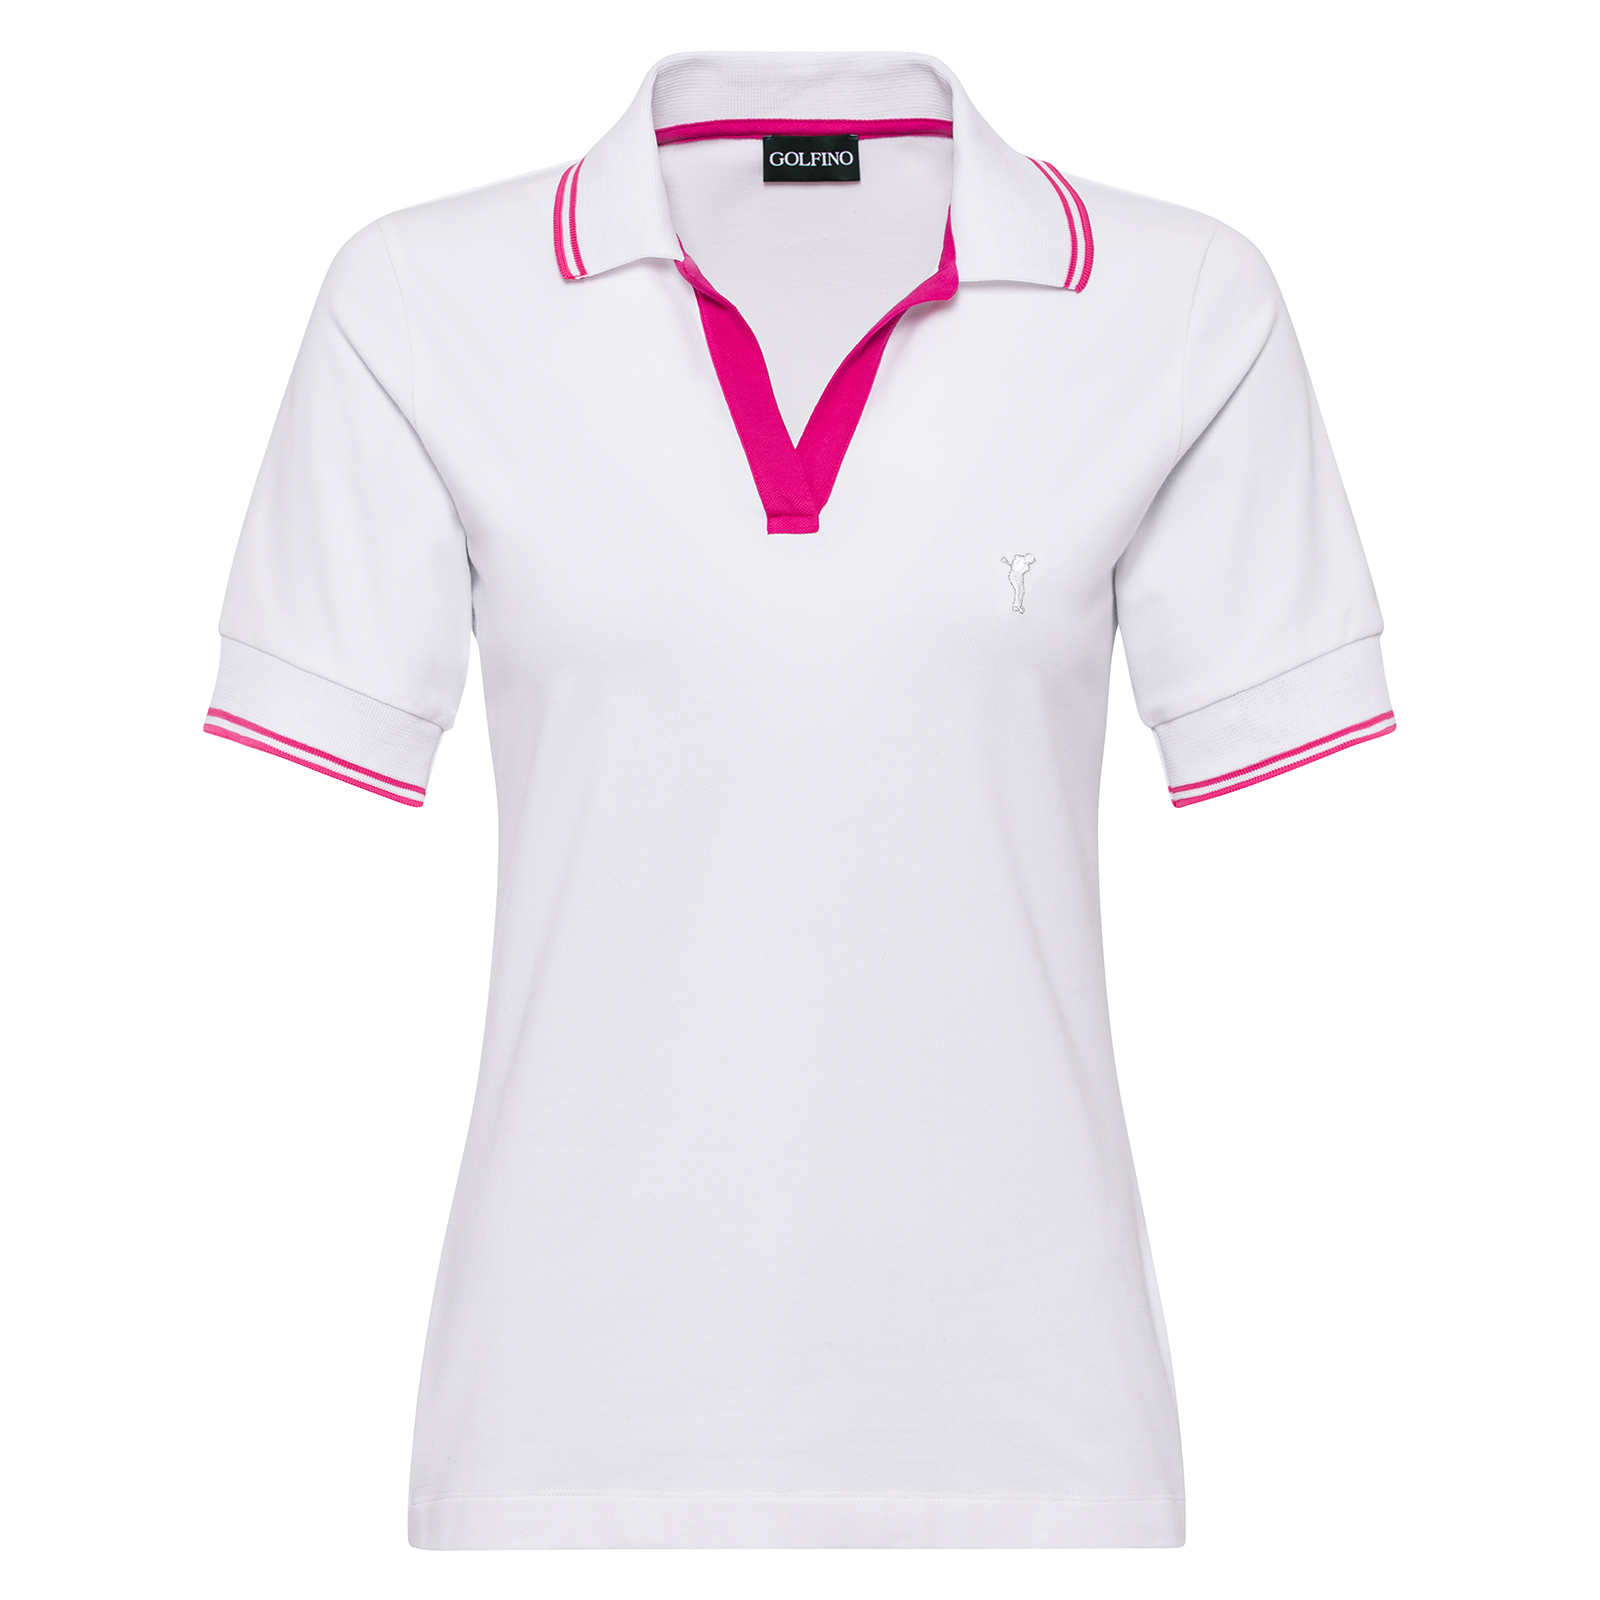 Ladies' golf shirt with sun protection 